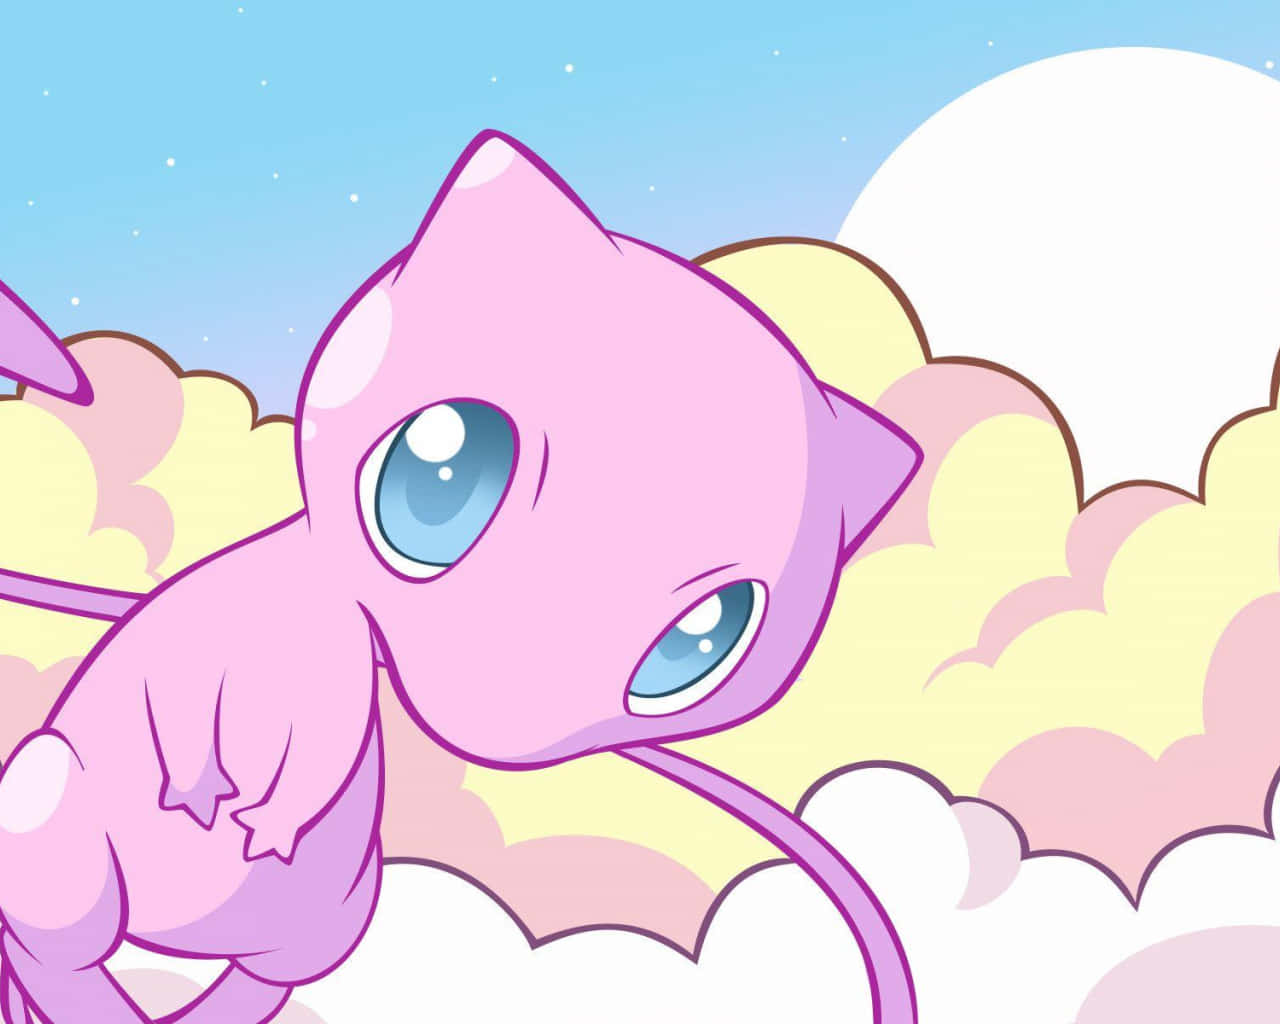 Delightful Mew Gliding Amongst a Cosmos of Stars